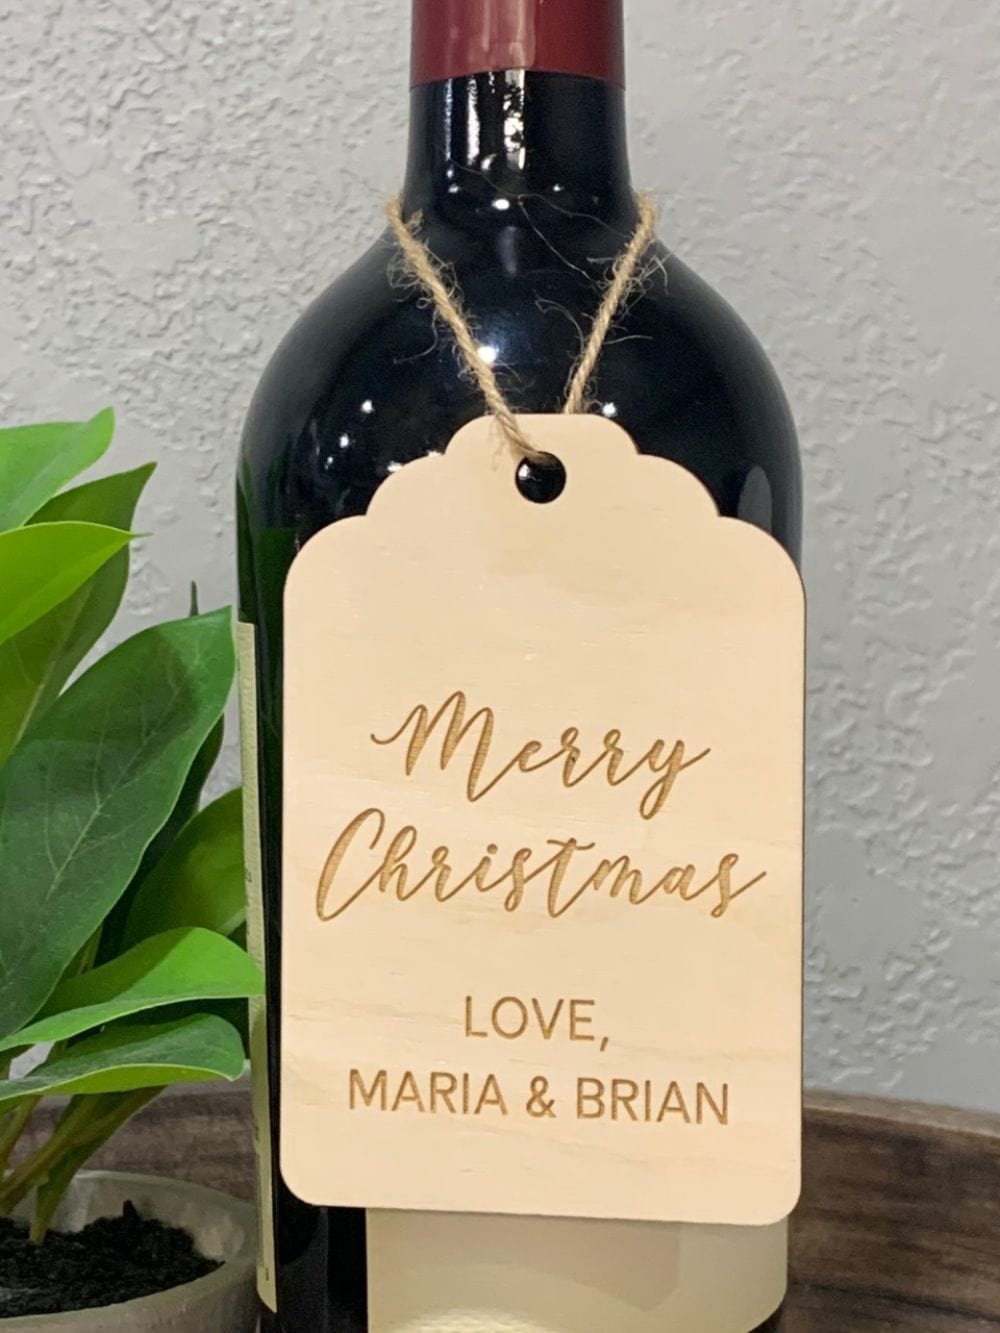 Laser engraved and cut wood Merry Christmas wine bottle tag. Comes personalized with your names or short message. Comes with jute twine.